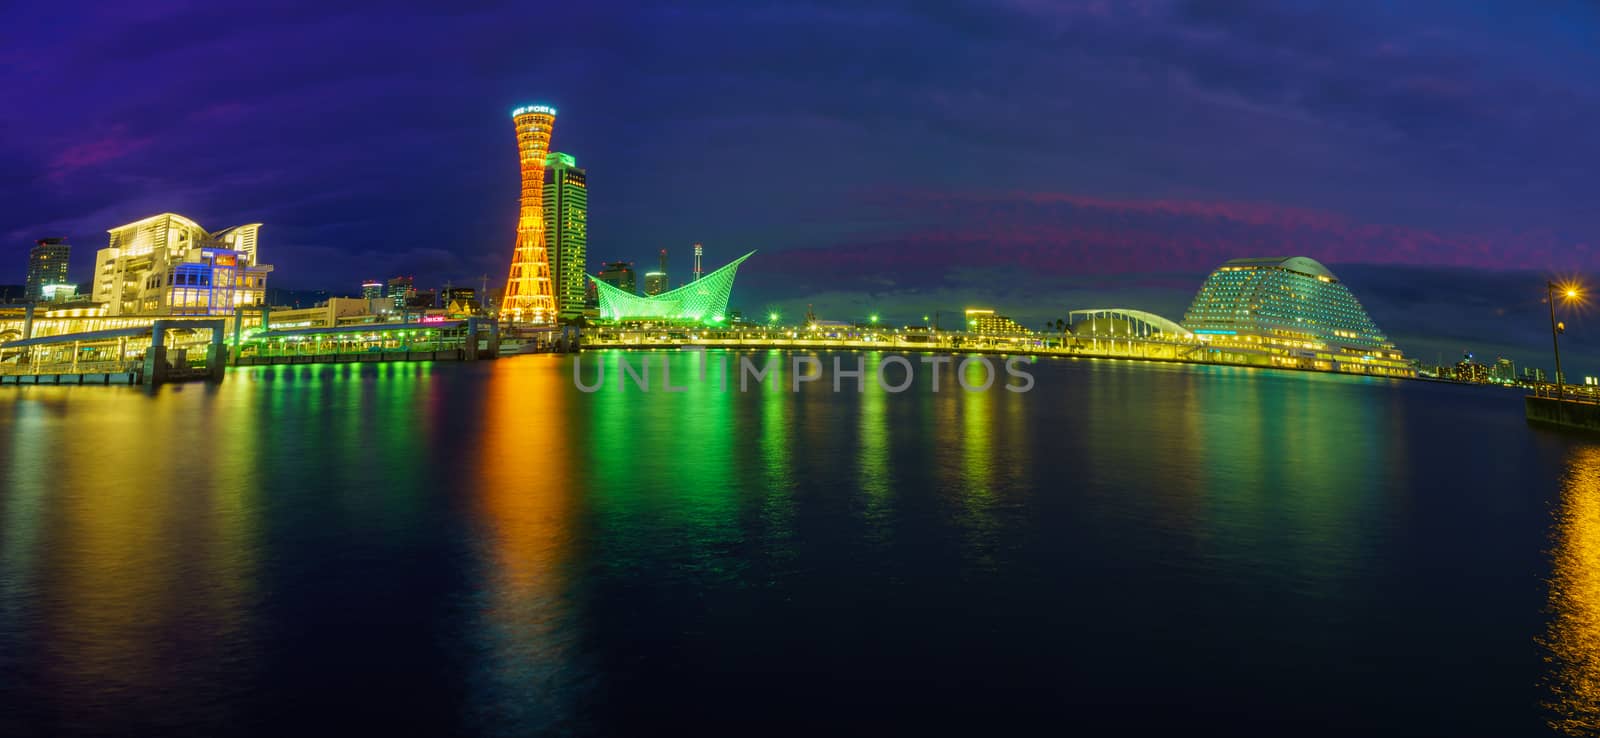 Kobe, Japan - October 11, 2019: Panoramic view of the Port at evening, with the Kobe Port Tower and other landmarks, in Kobe, Japan